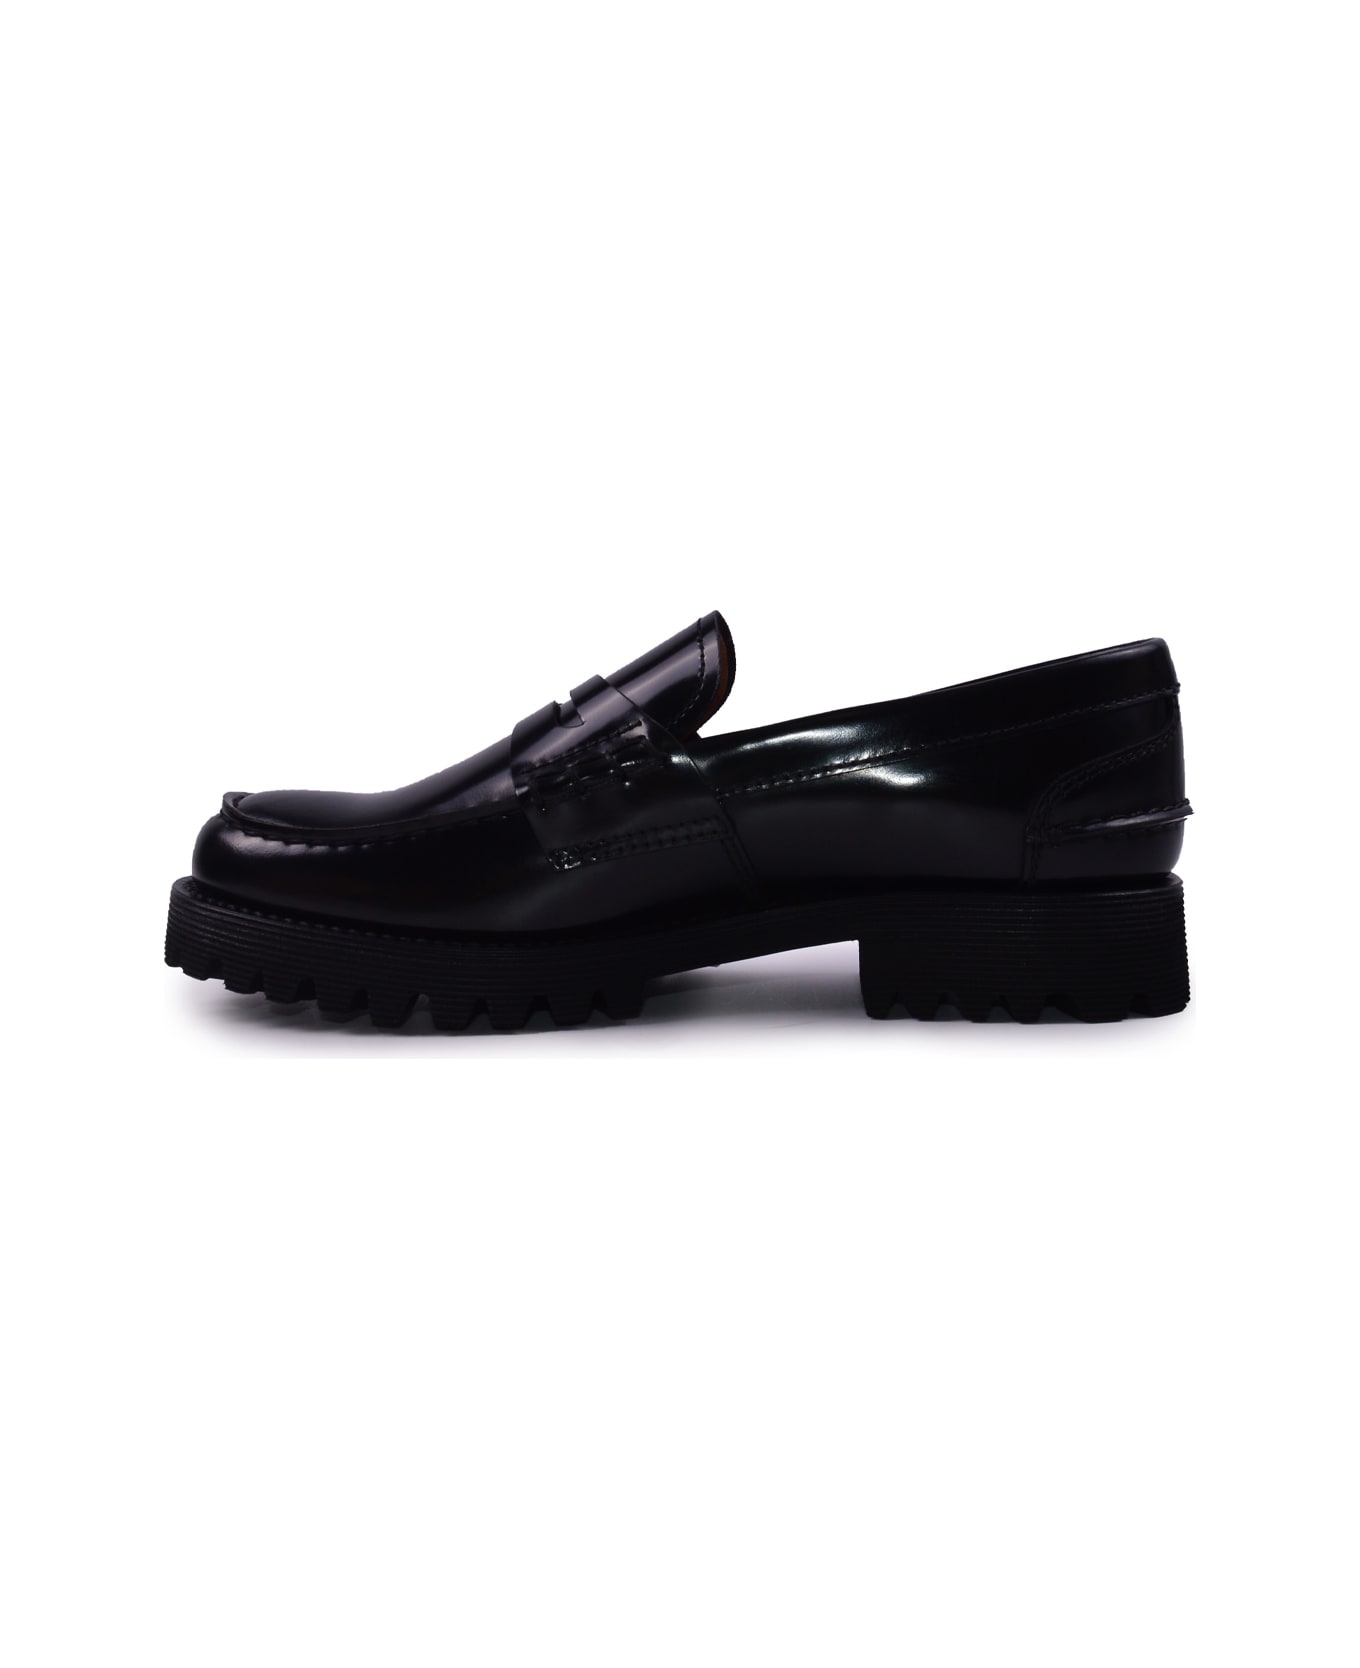 Church's Loafers - Black